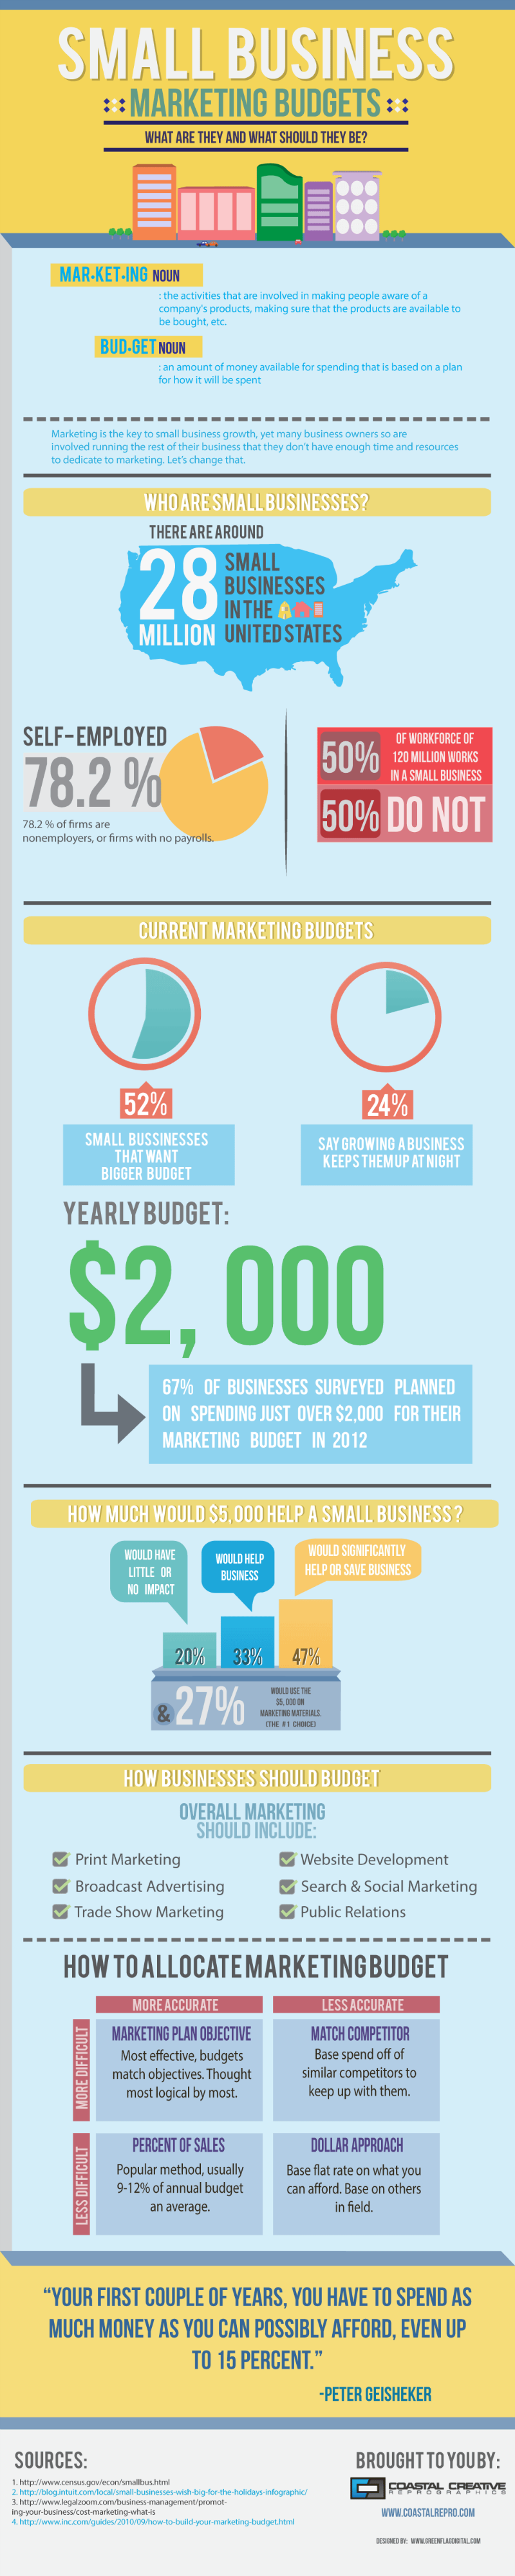 Small Business Marketing Budget Infographic